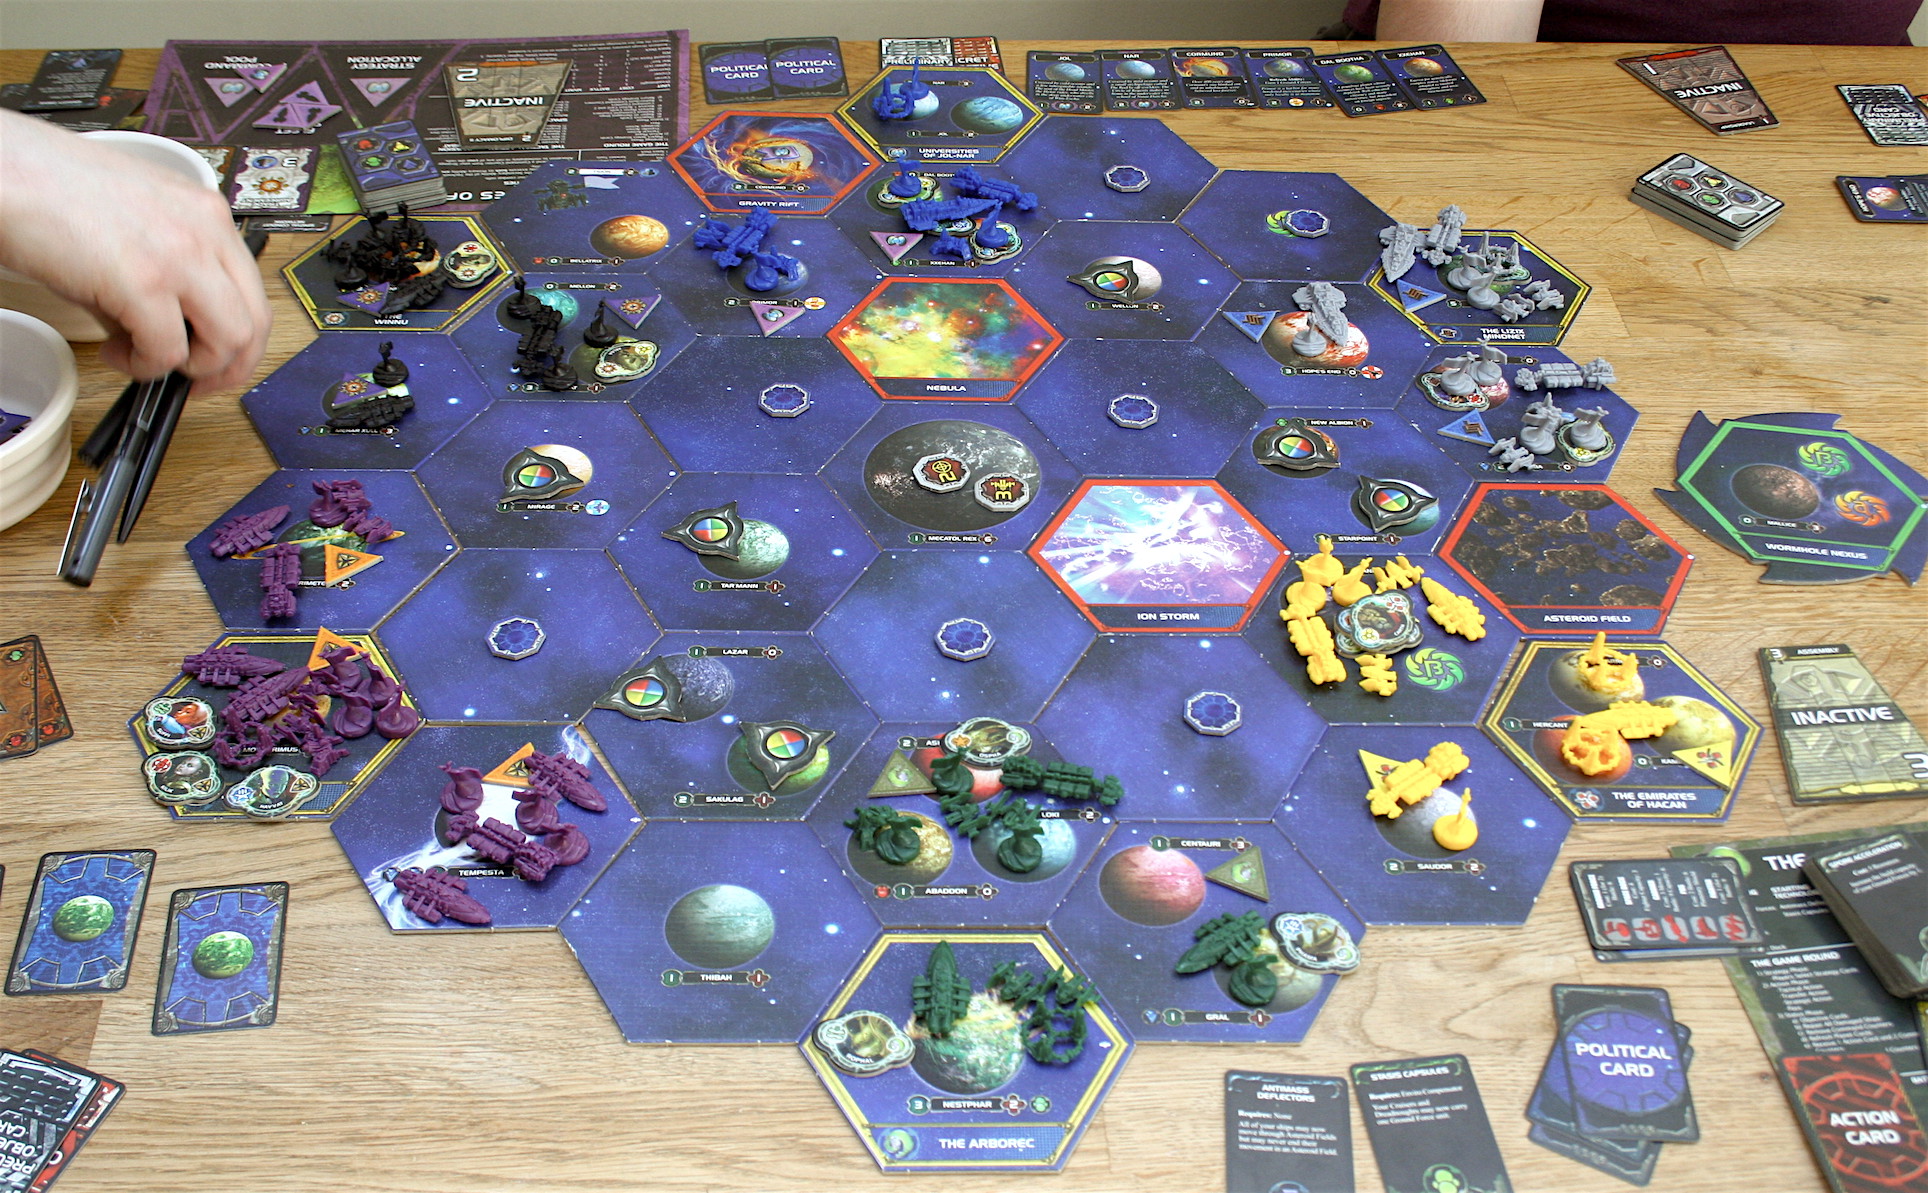 Twilight Imperium, a board game with meal breaks | Ars Technica